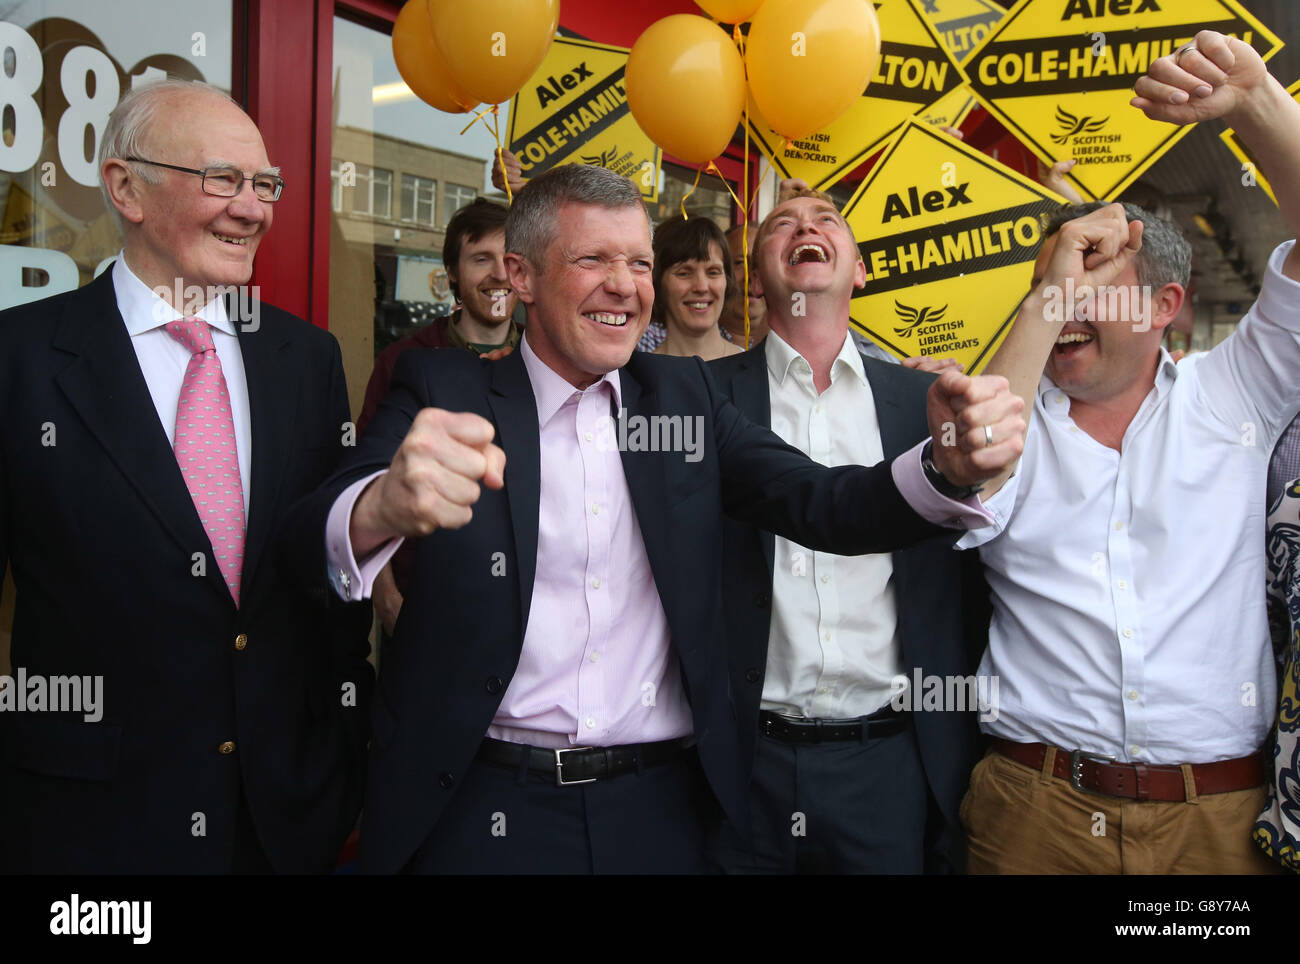 (left to right) Former Liberal Democrat leaders Menzies Campbell, Scottish Liberal Democrat leader Wiilie Rennie, Liberal Democrat leader Tim Farron and Lib Dem Alex Cole-Hamilton, as they celebrate in Edinburgh, after Rennie and Cole-Hamilton both won their seats in the Scottish parliamentary elections. Stock Photo